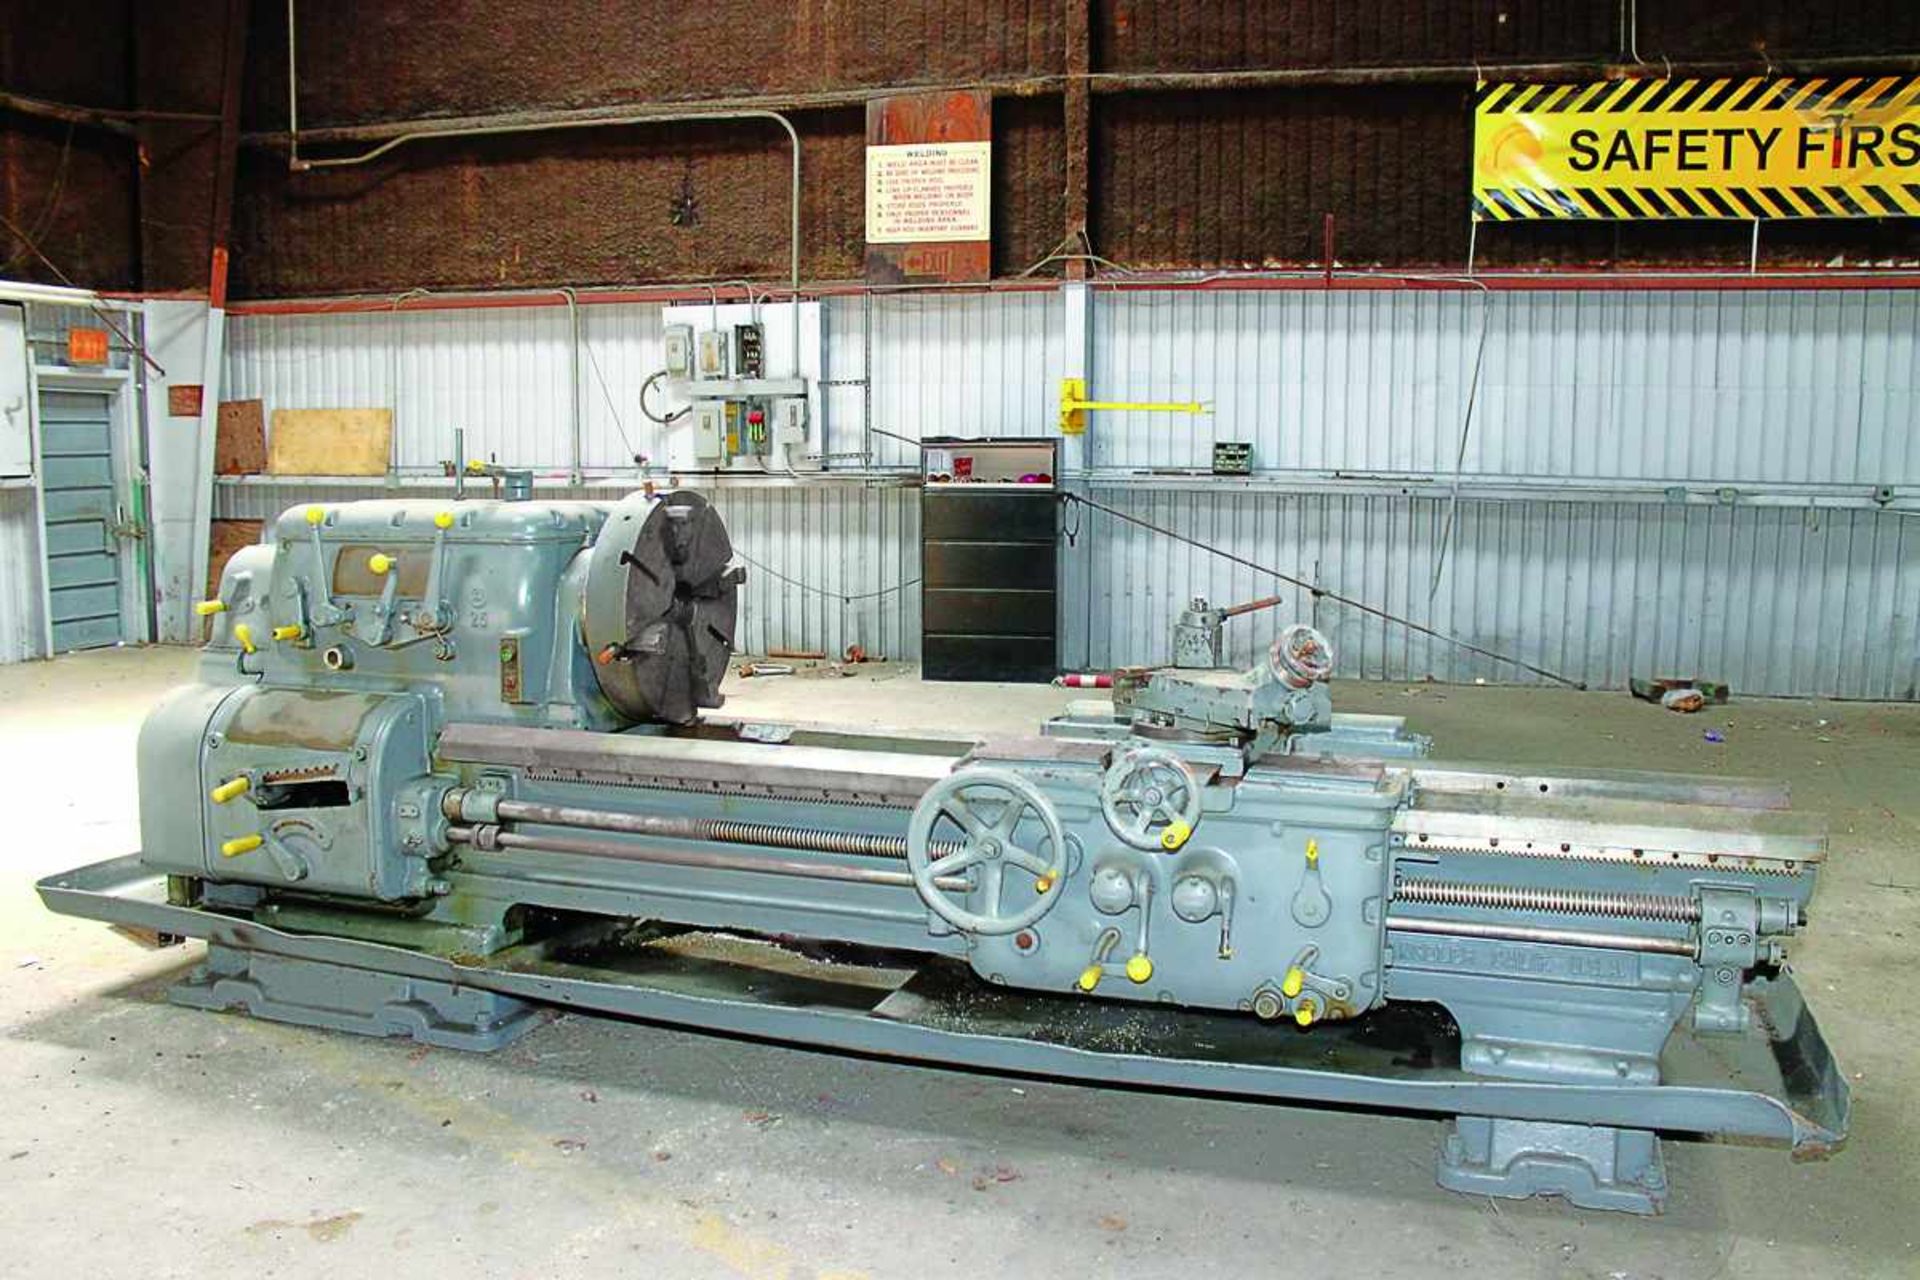 ENGINE LATHE, AXELSON MDL. 25, spds: 6-555 RPM, 24" dia. 4-jaw chuck, 72" centers, 28-3/4" sw.